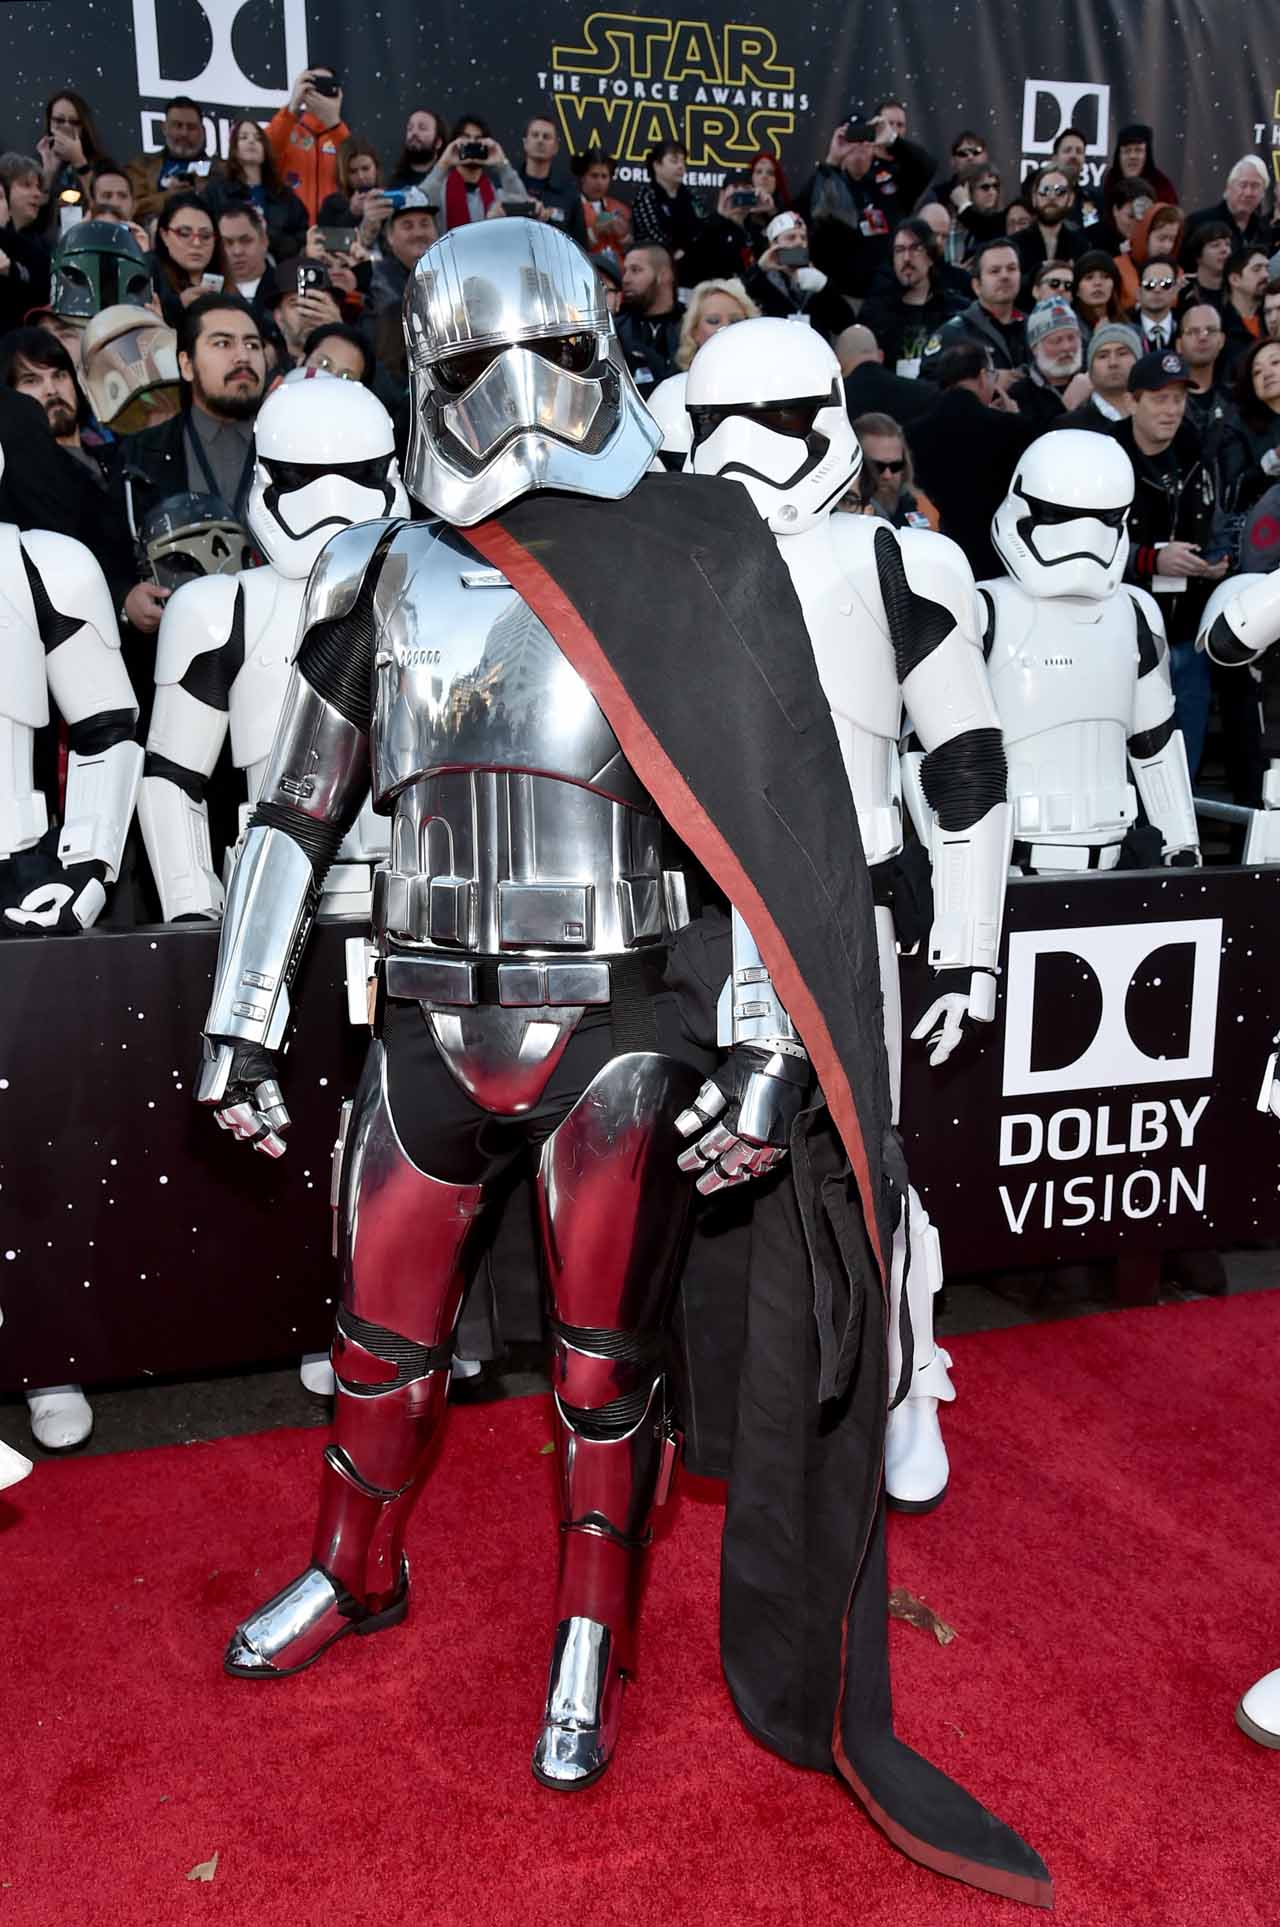 HOLLYWOOD, CA - DECEMBER 14: Captain Phasma attends the World Premiere of ?Star Wars: The Force Awakens? at the Dolby, El Capitan, and TCL Theatres on December 14, 2015 in Hollywood, California.  (Photo by Alberto E. Rodriguez/Getty Images for Disney) *** Local Caption *** Captain Phasma